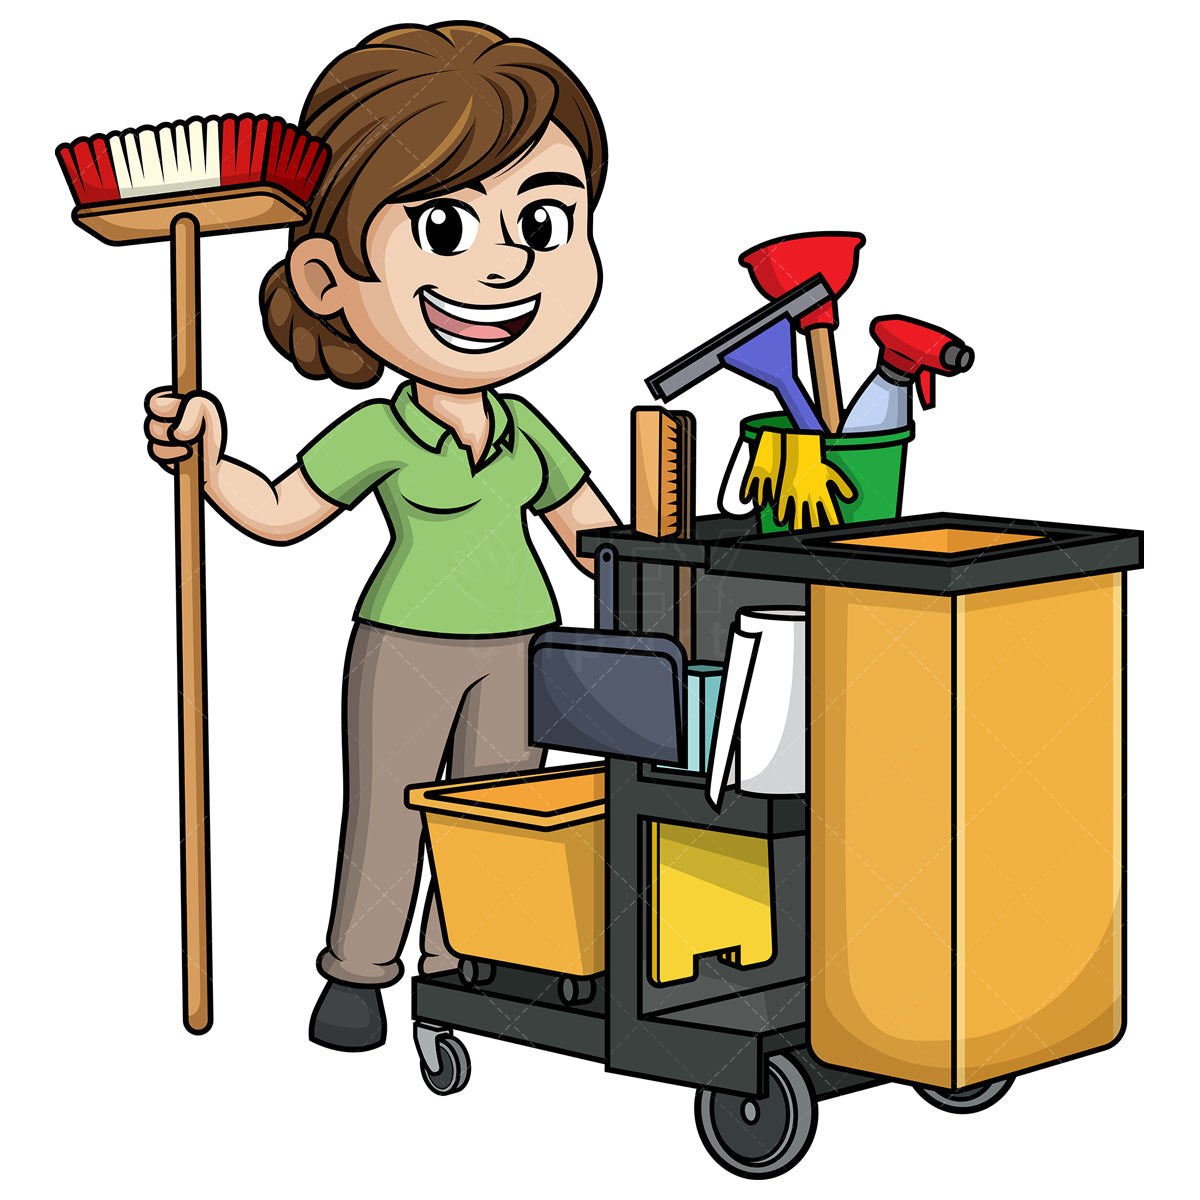 Royalty-free stock vector illustration of a female janitor with cleaning cart.